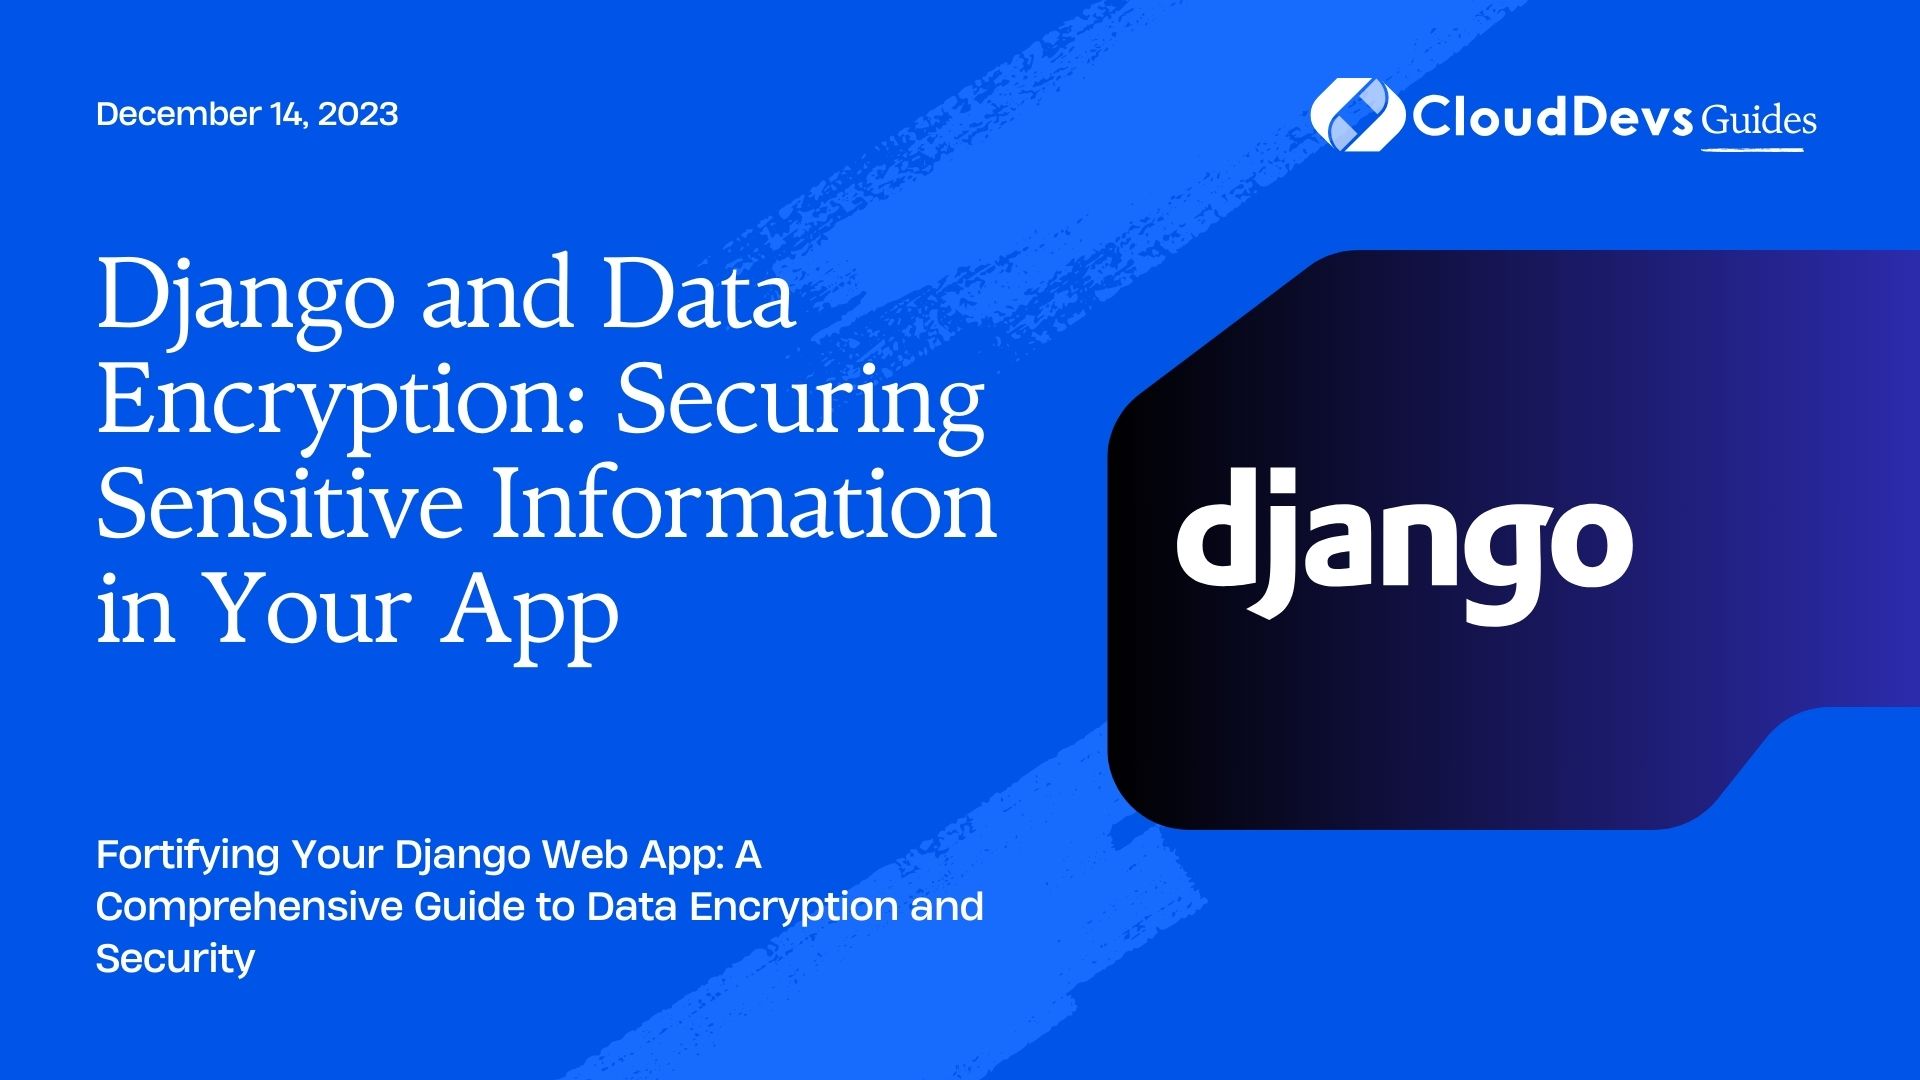 Django and Data Encryption: Securing Sensitive Information in Your App